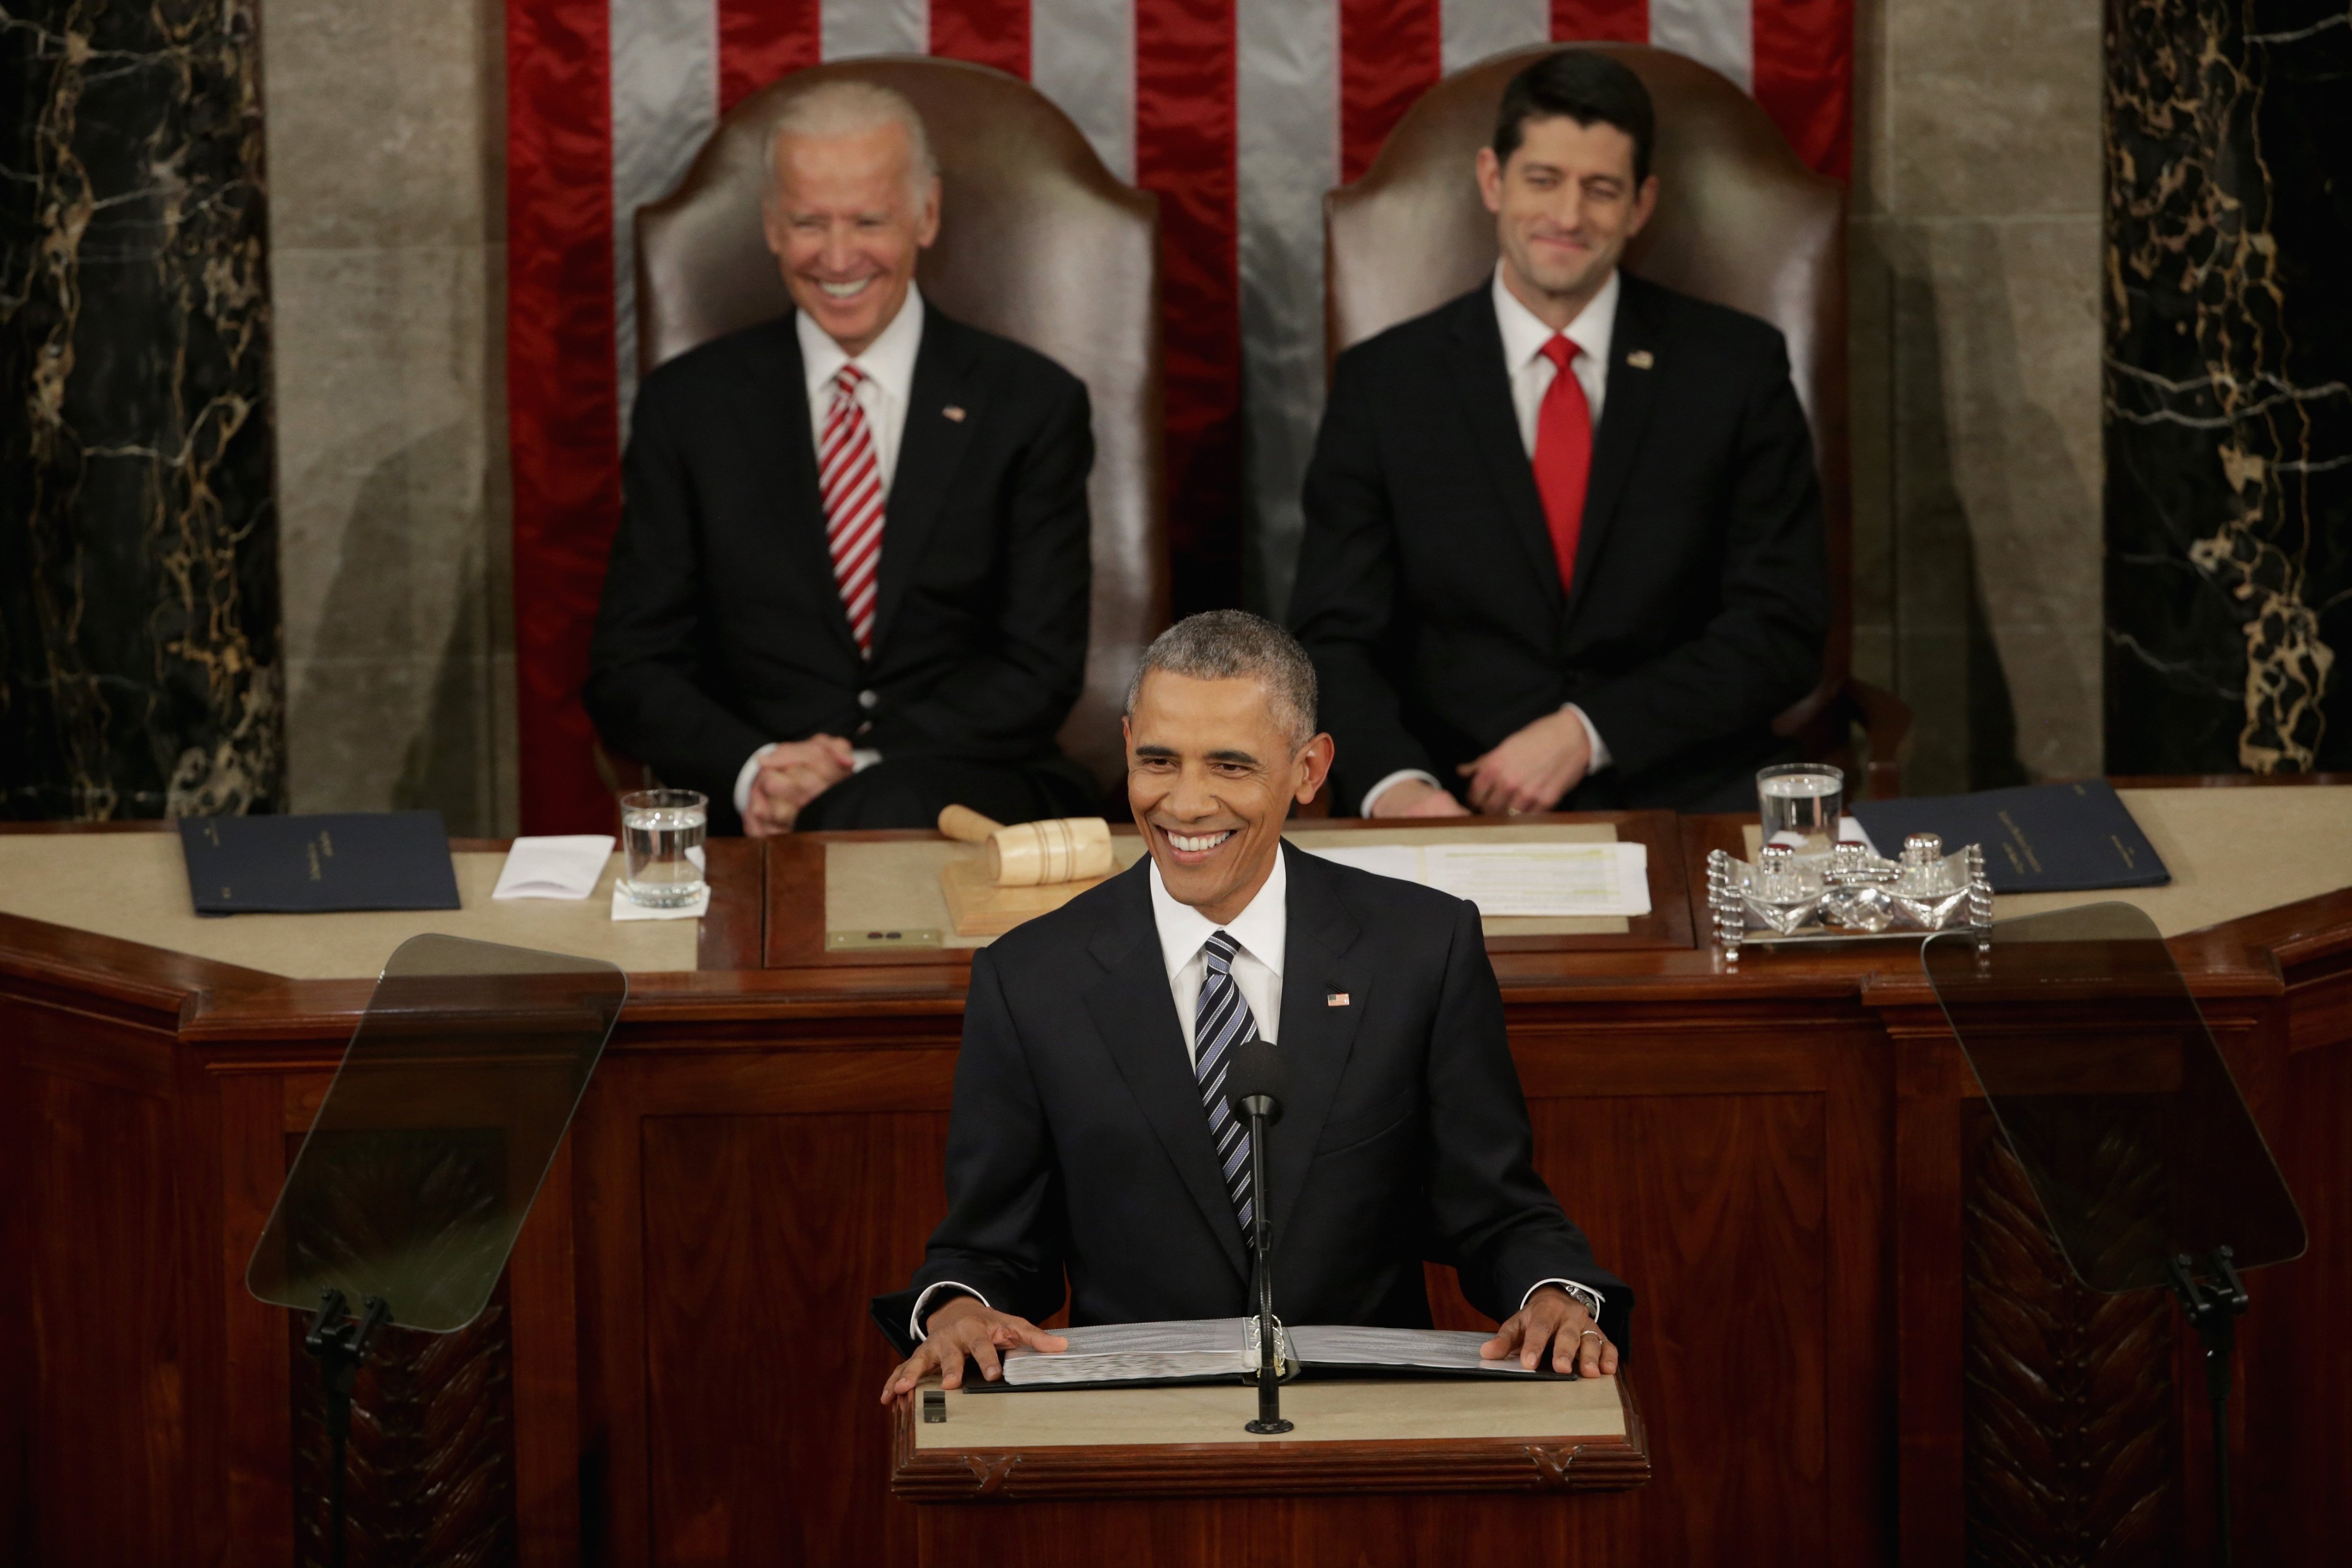 U.S. President Barack Obama delivers the State of the Union speech before members of Congress in the House chamber of the U.S. Capitol Jan. 12, 2016 in Washington. (Alex Wong—Getty Images)